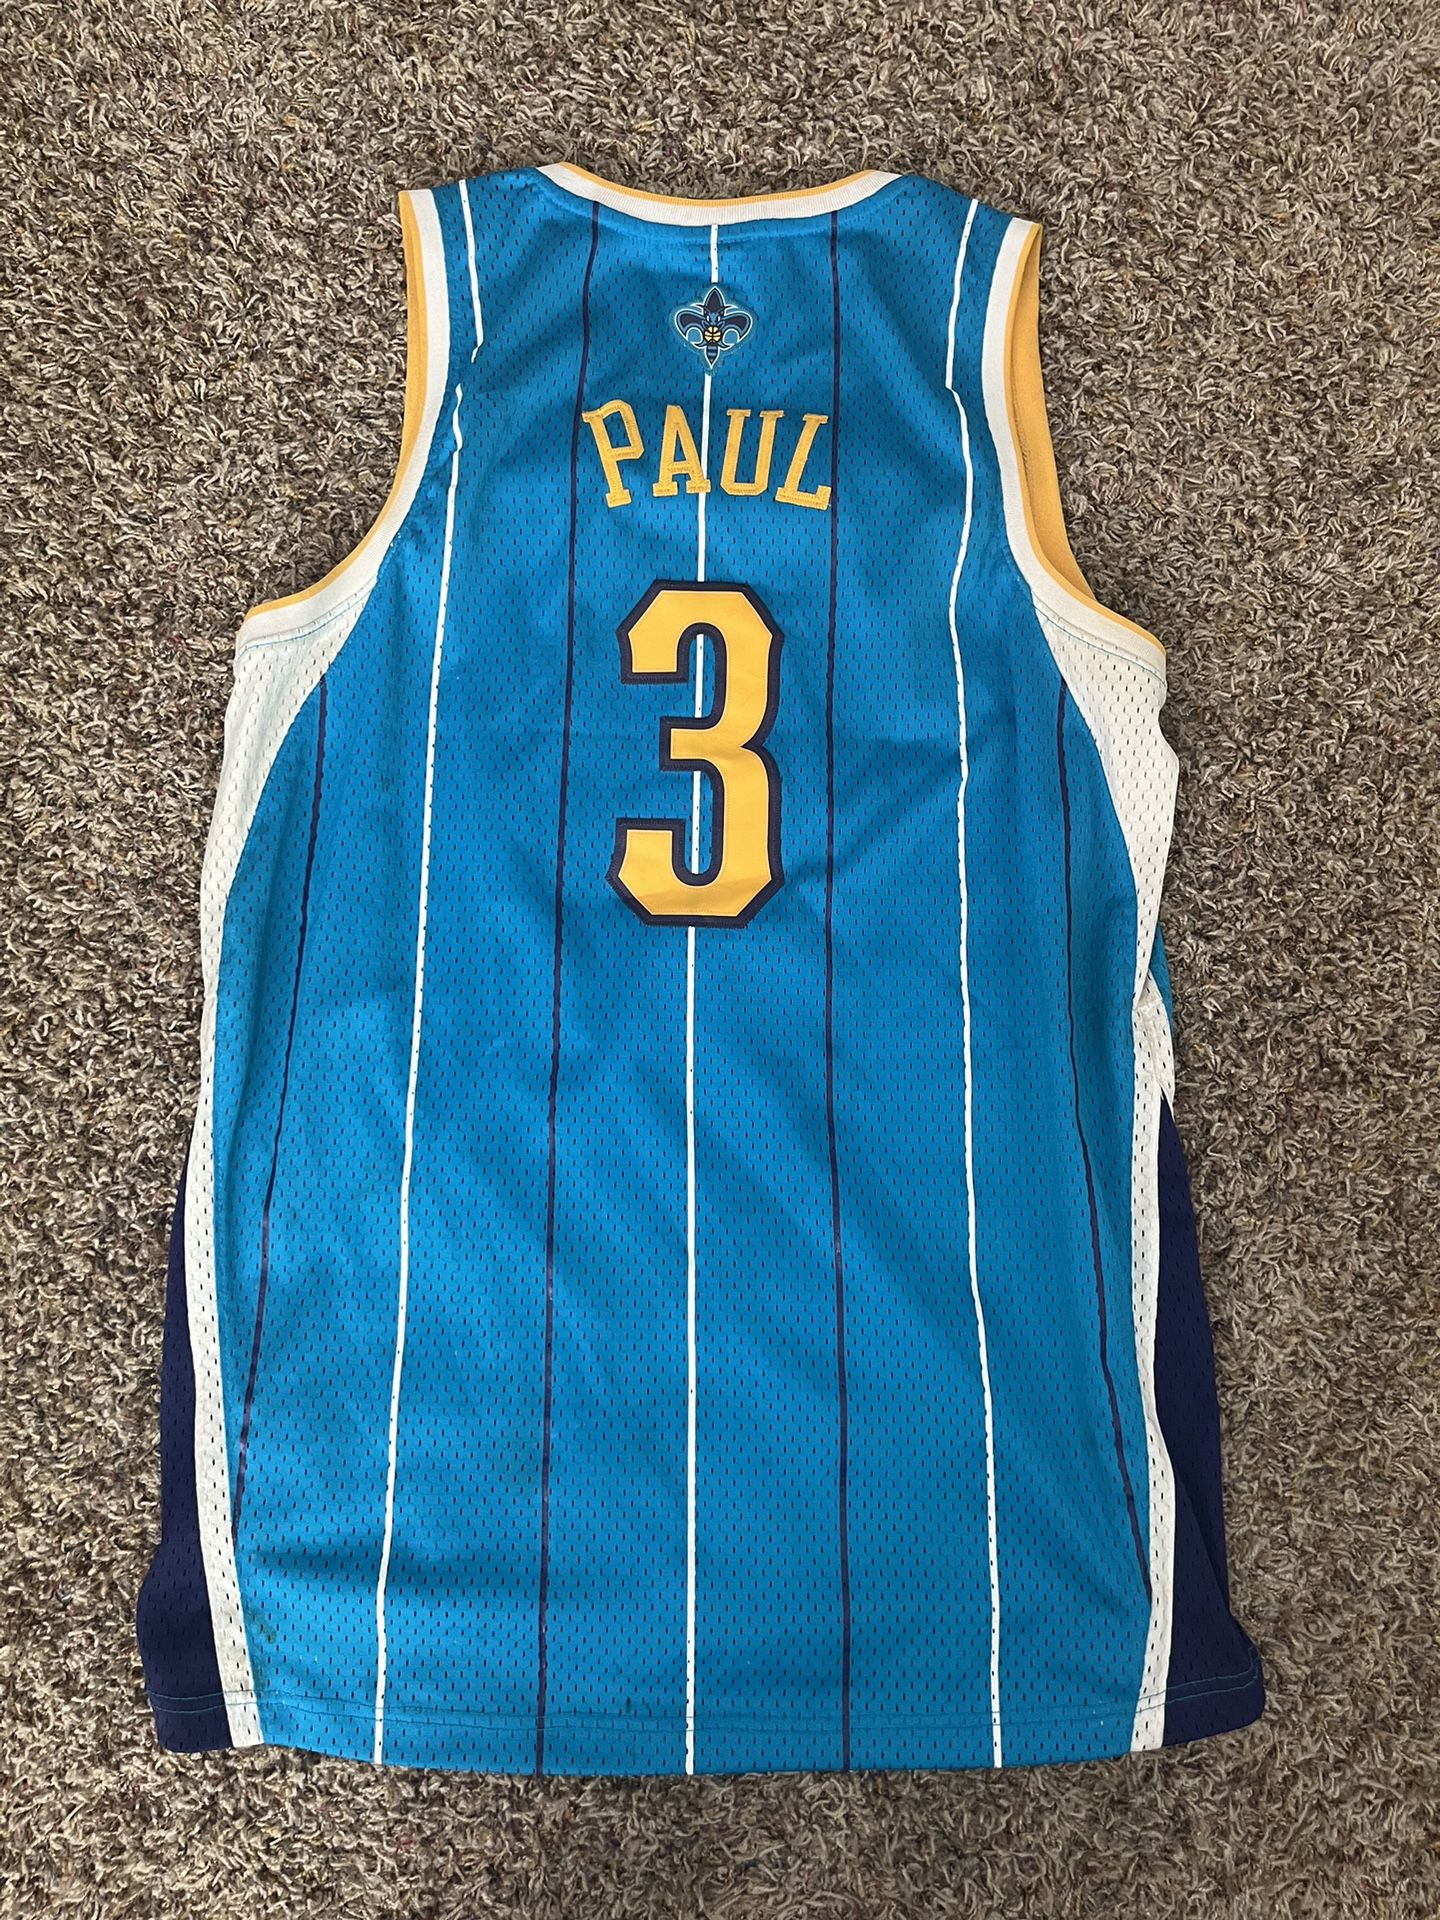 Retro Charlotte Hornets Chris Paul Jersey for Sale in Salem, OR - OfferUp